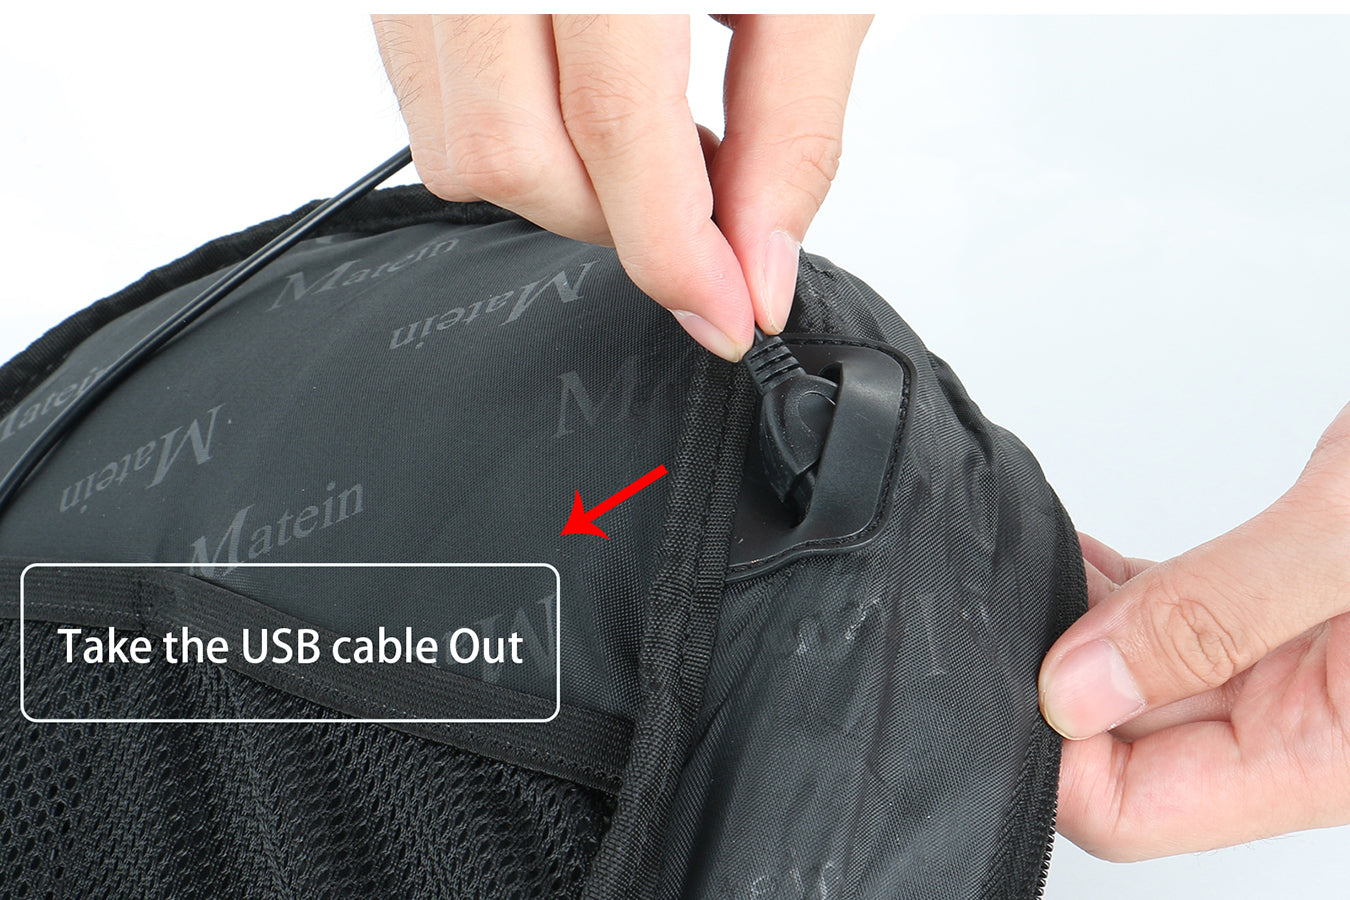 Instructions to remove usb cable of Matein Backpack